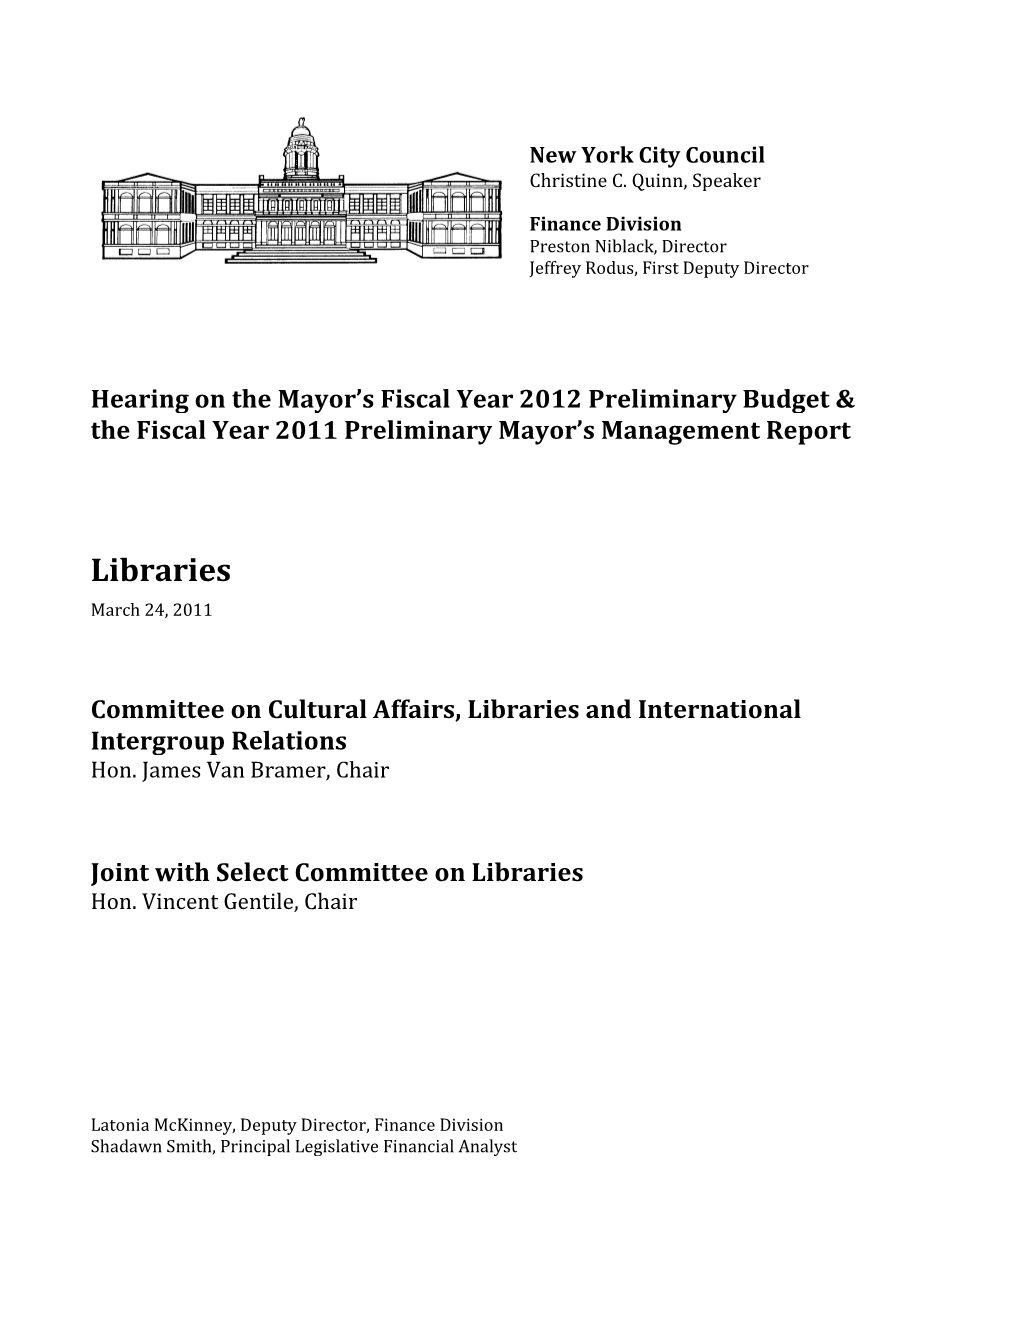 Libraries March 24, 2011